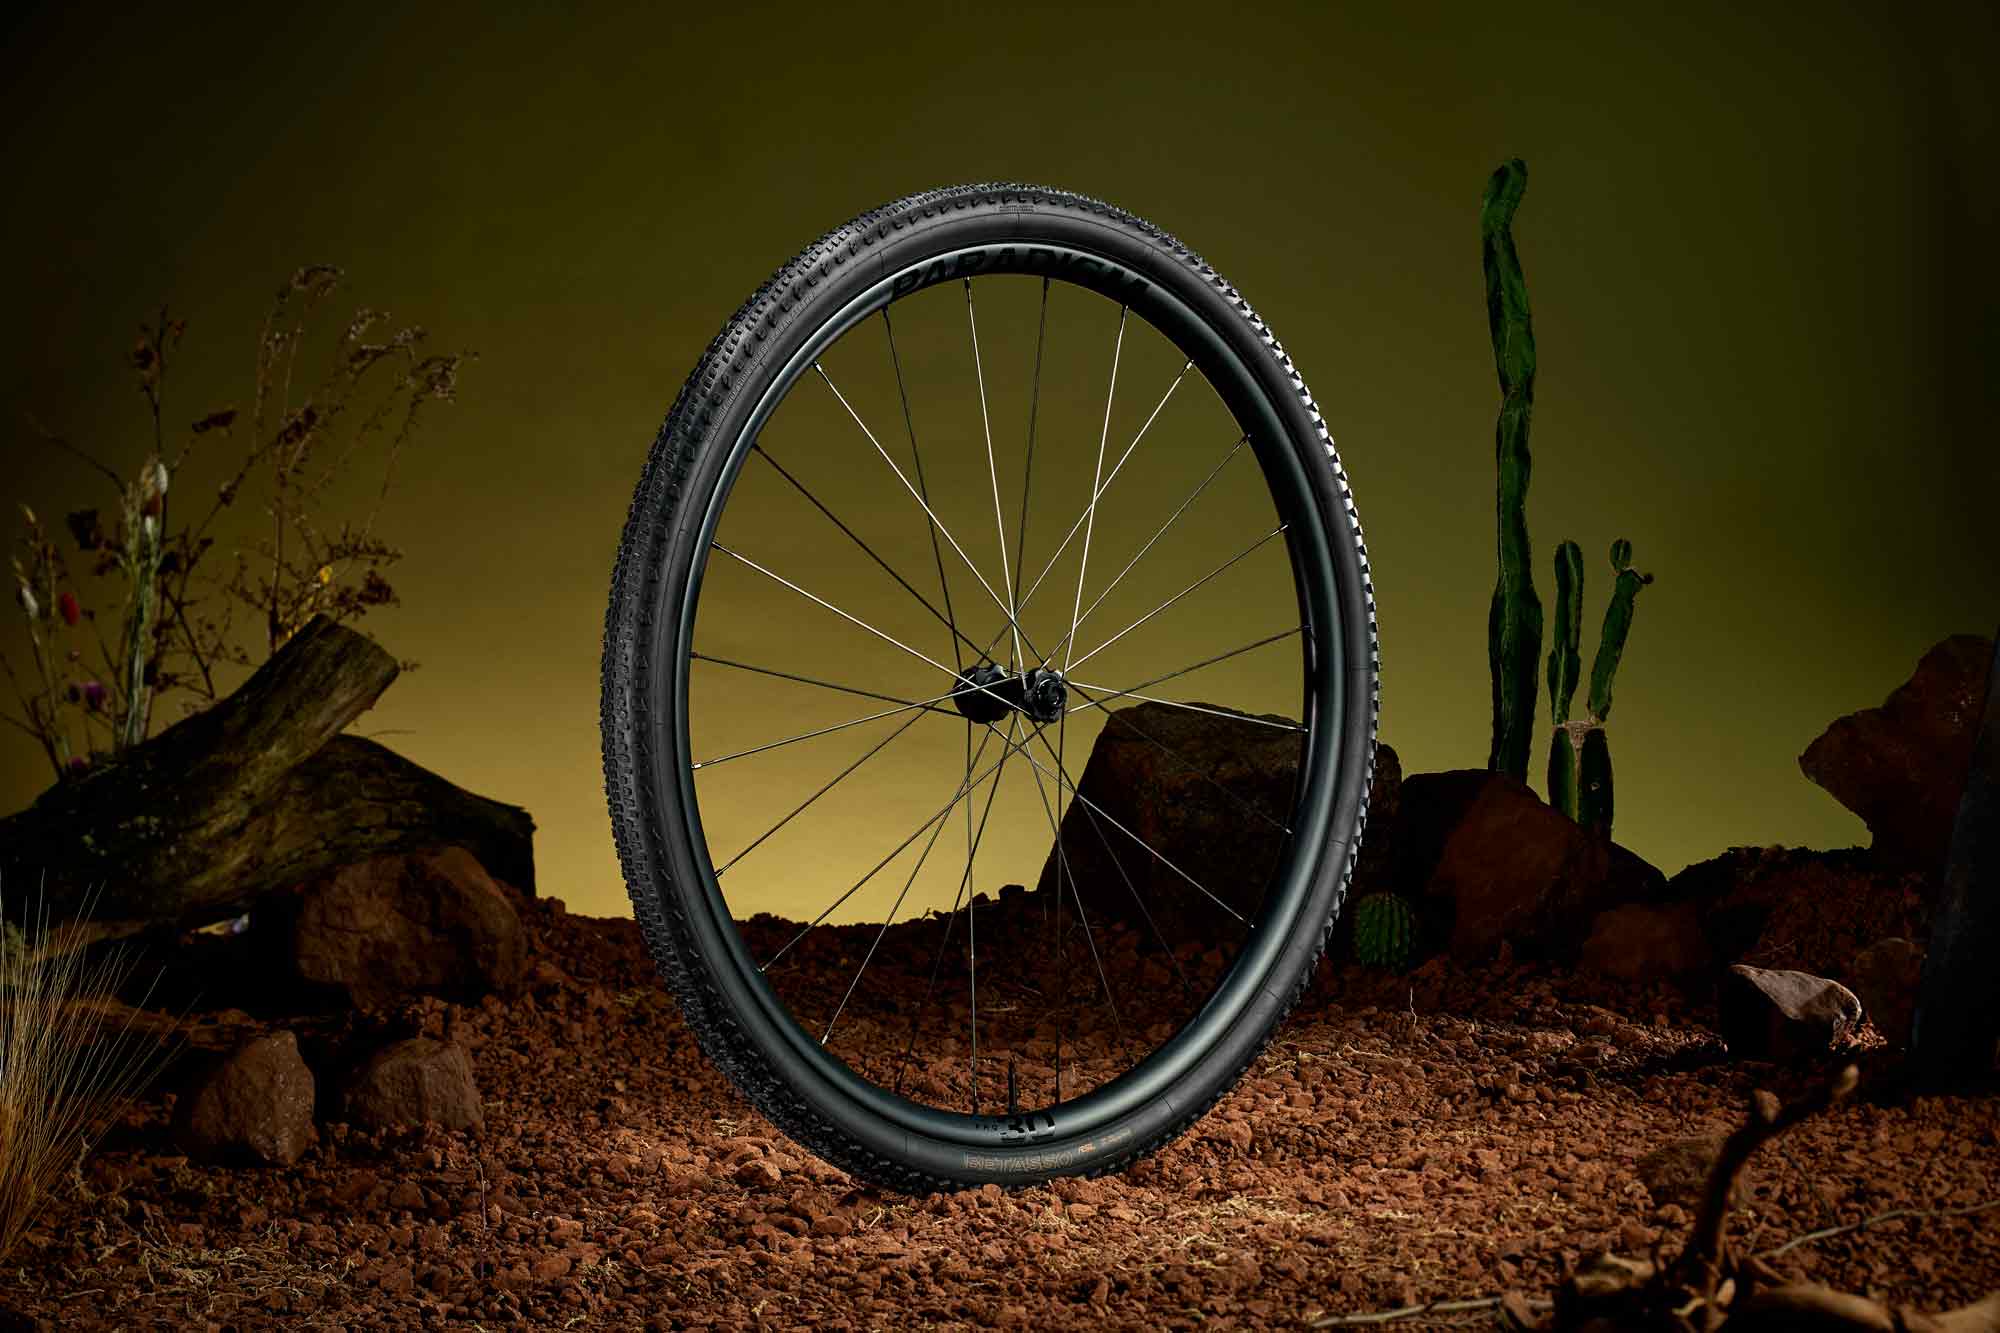 The bontrager gravel tire "betasso" in lateral profile